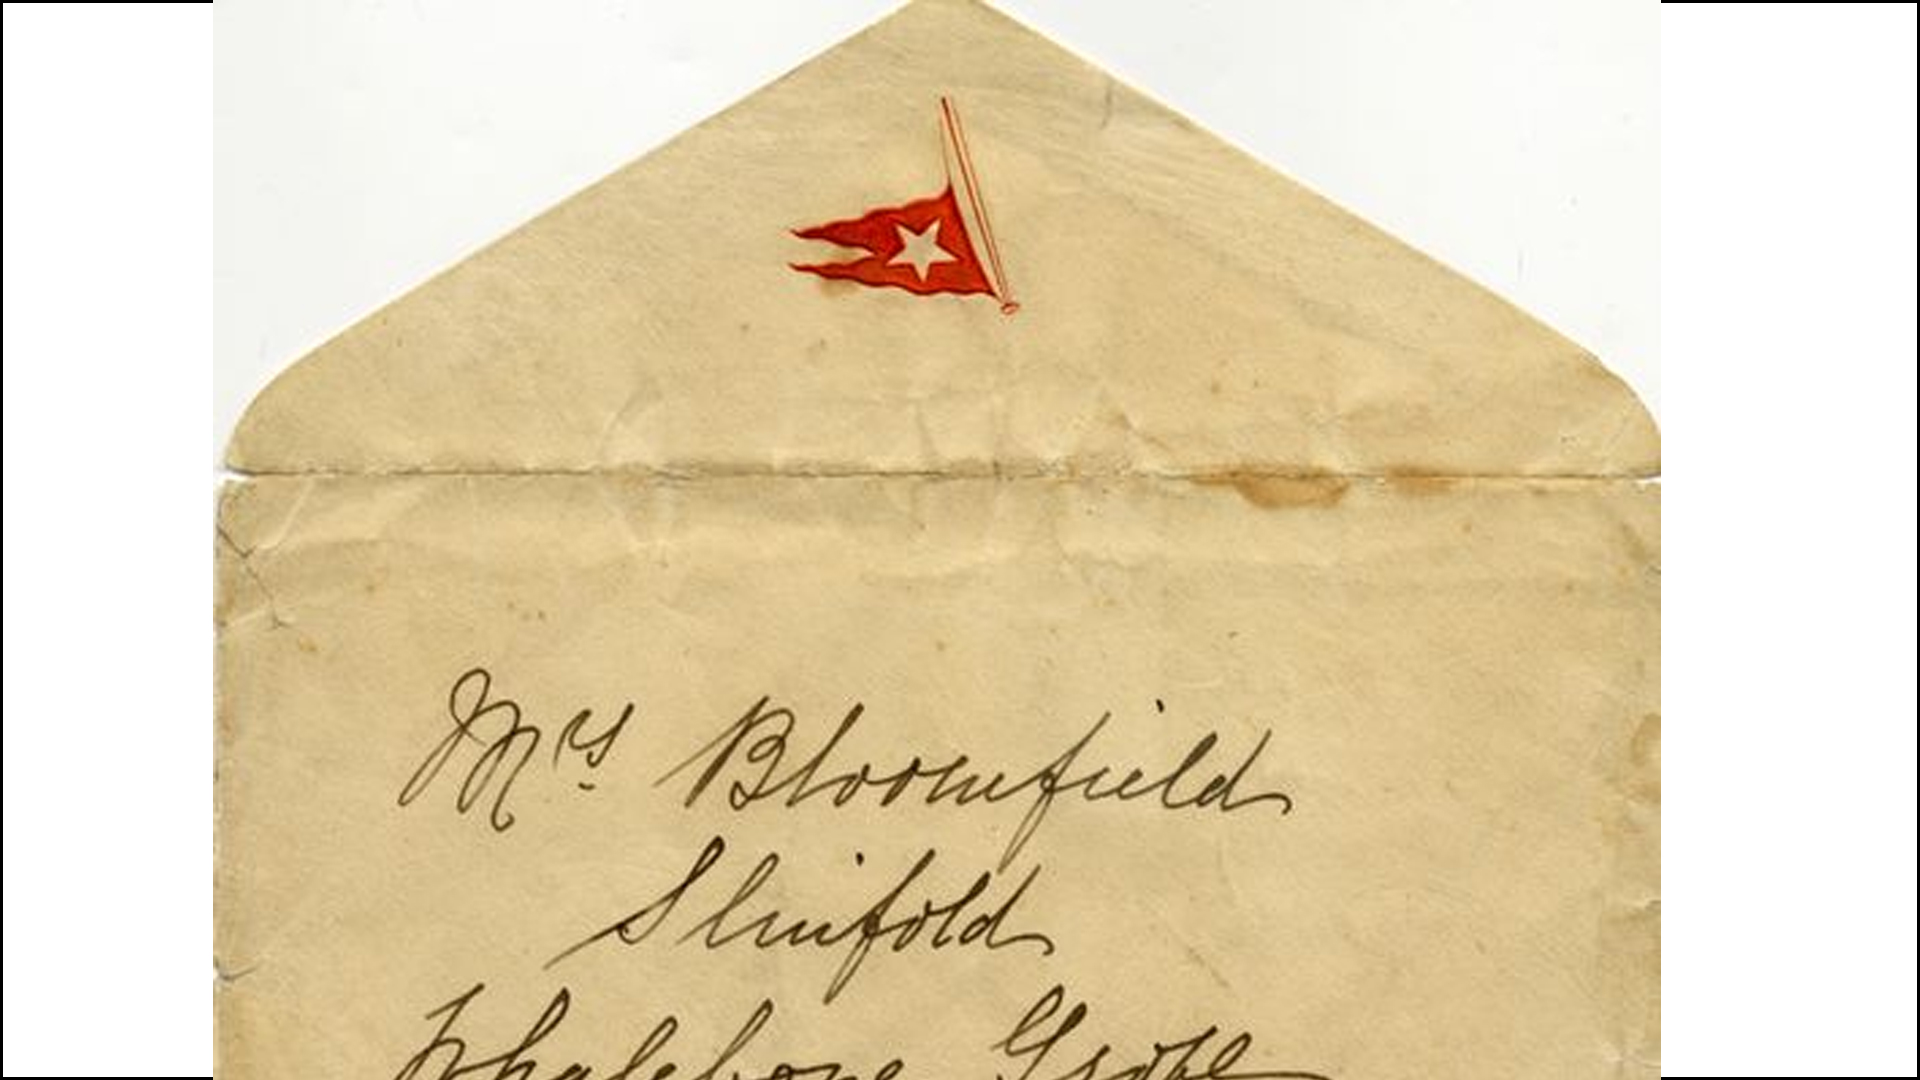 Letter written aboard the Titanic to be auctioned 